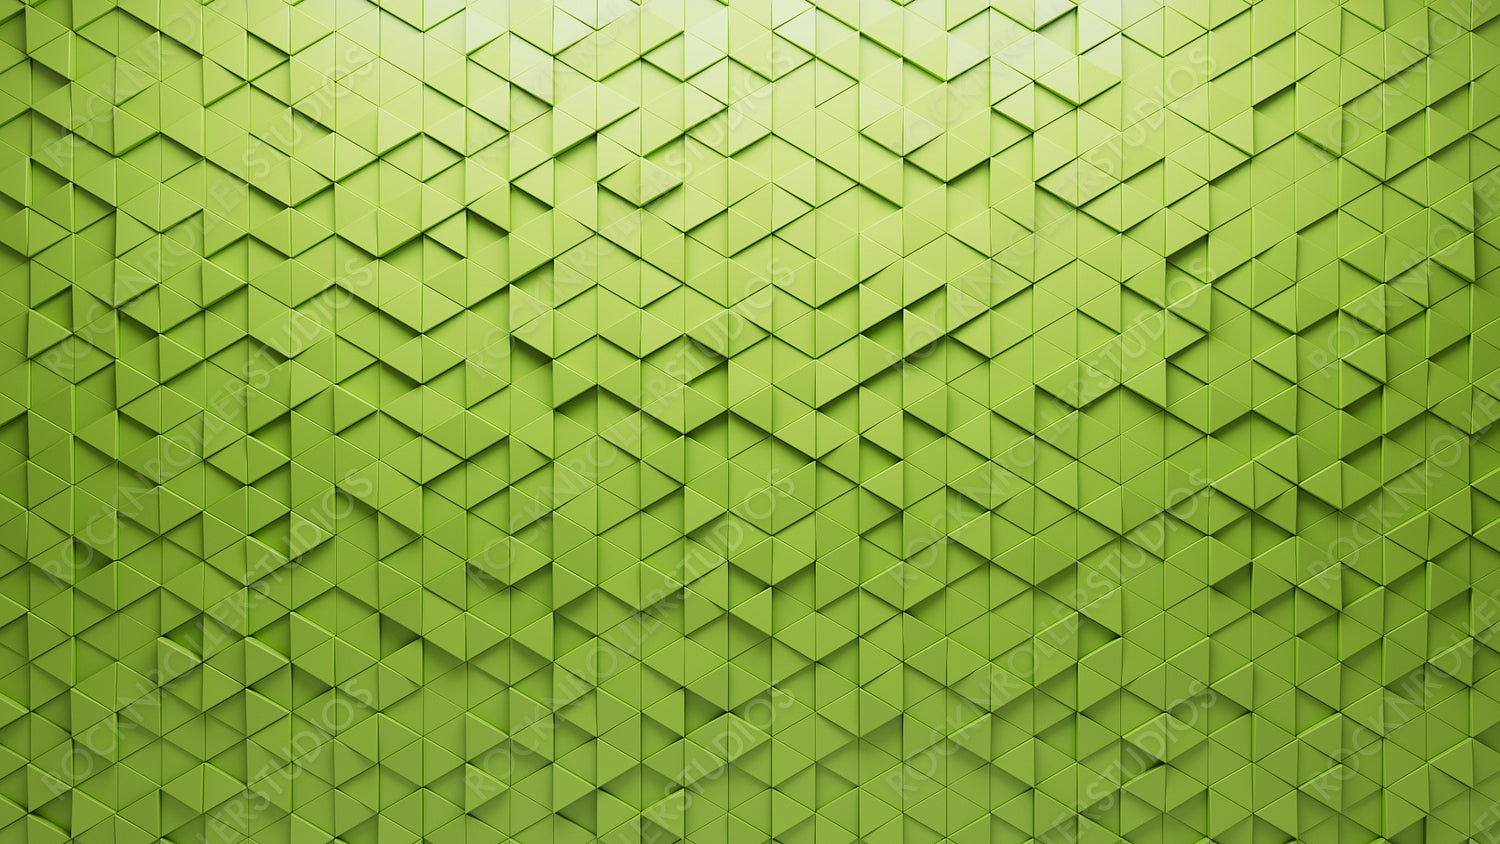 Futuristic Tiles arranged to create a Green wall. Triangular, 3D Background formed from Semigloss blocks. 3D Render